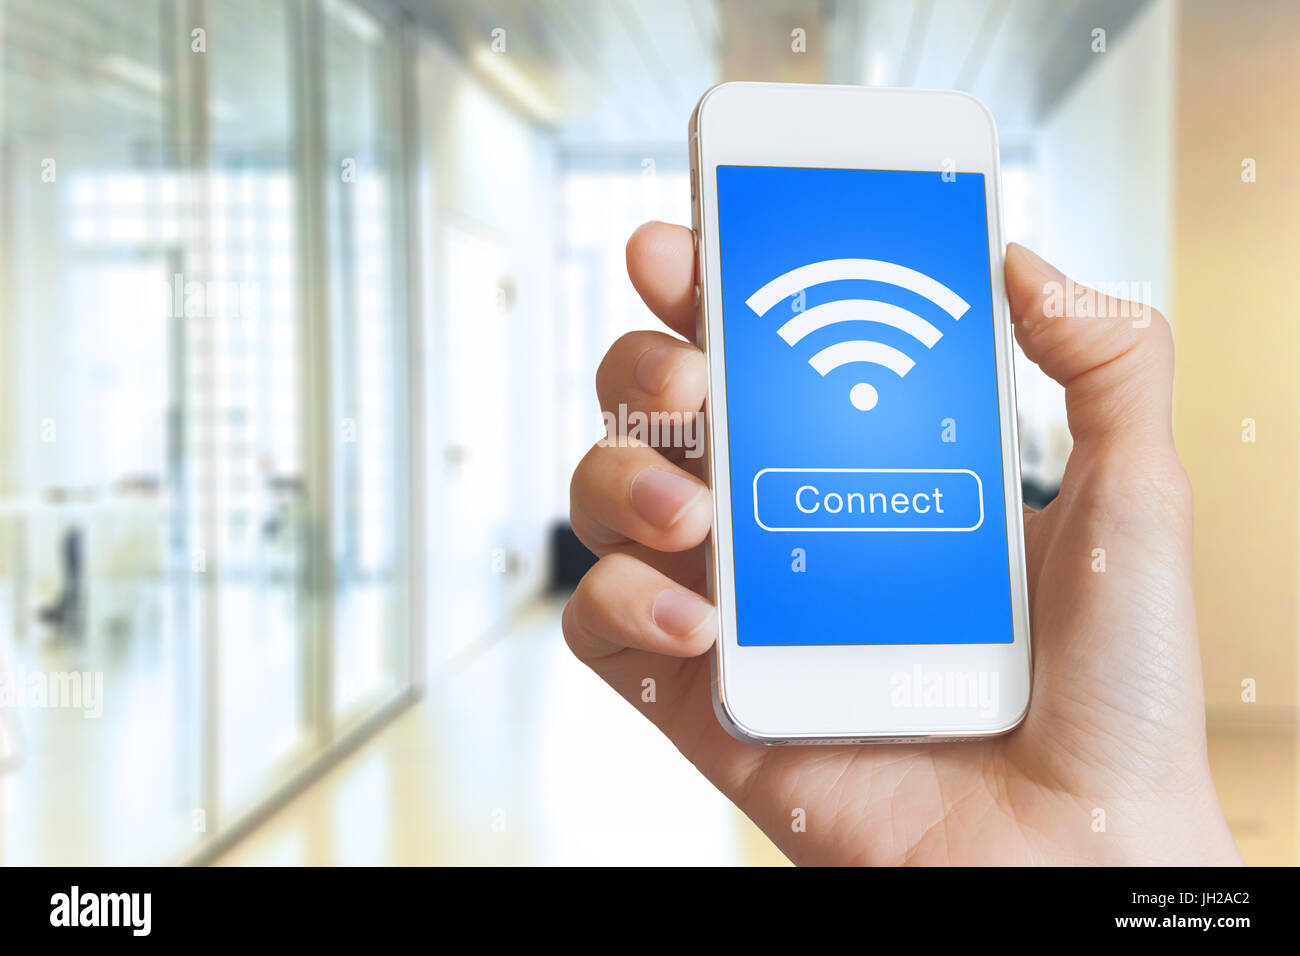 Hand holding a smartphone with a button to connect to a free wireless internet hotspot on the screen with wifi icon Stock Photo